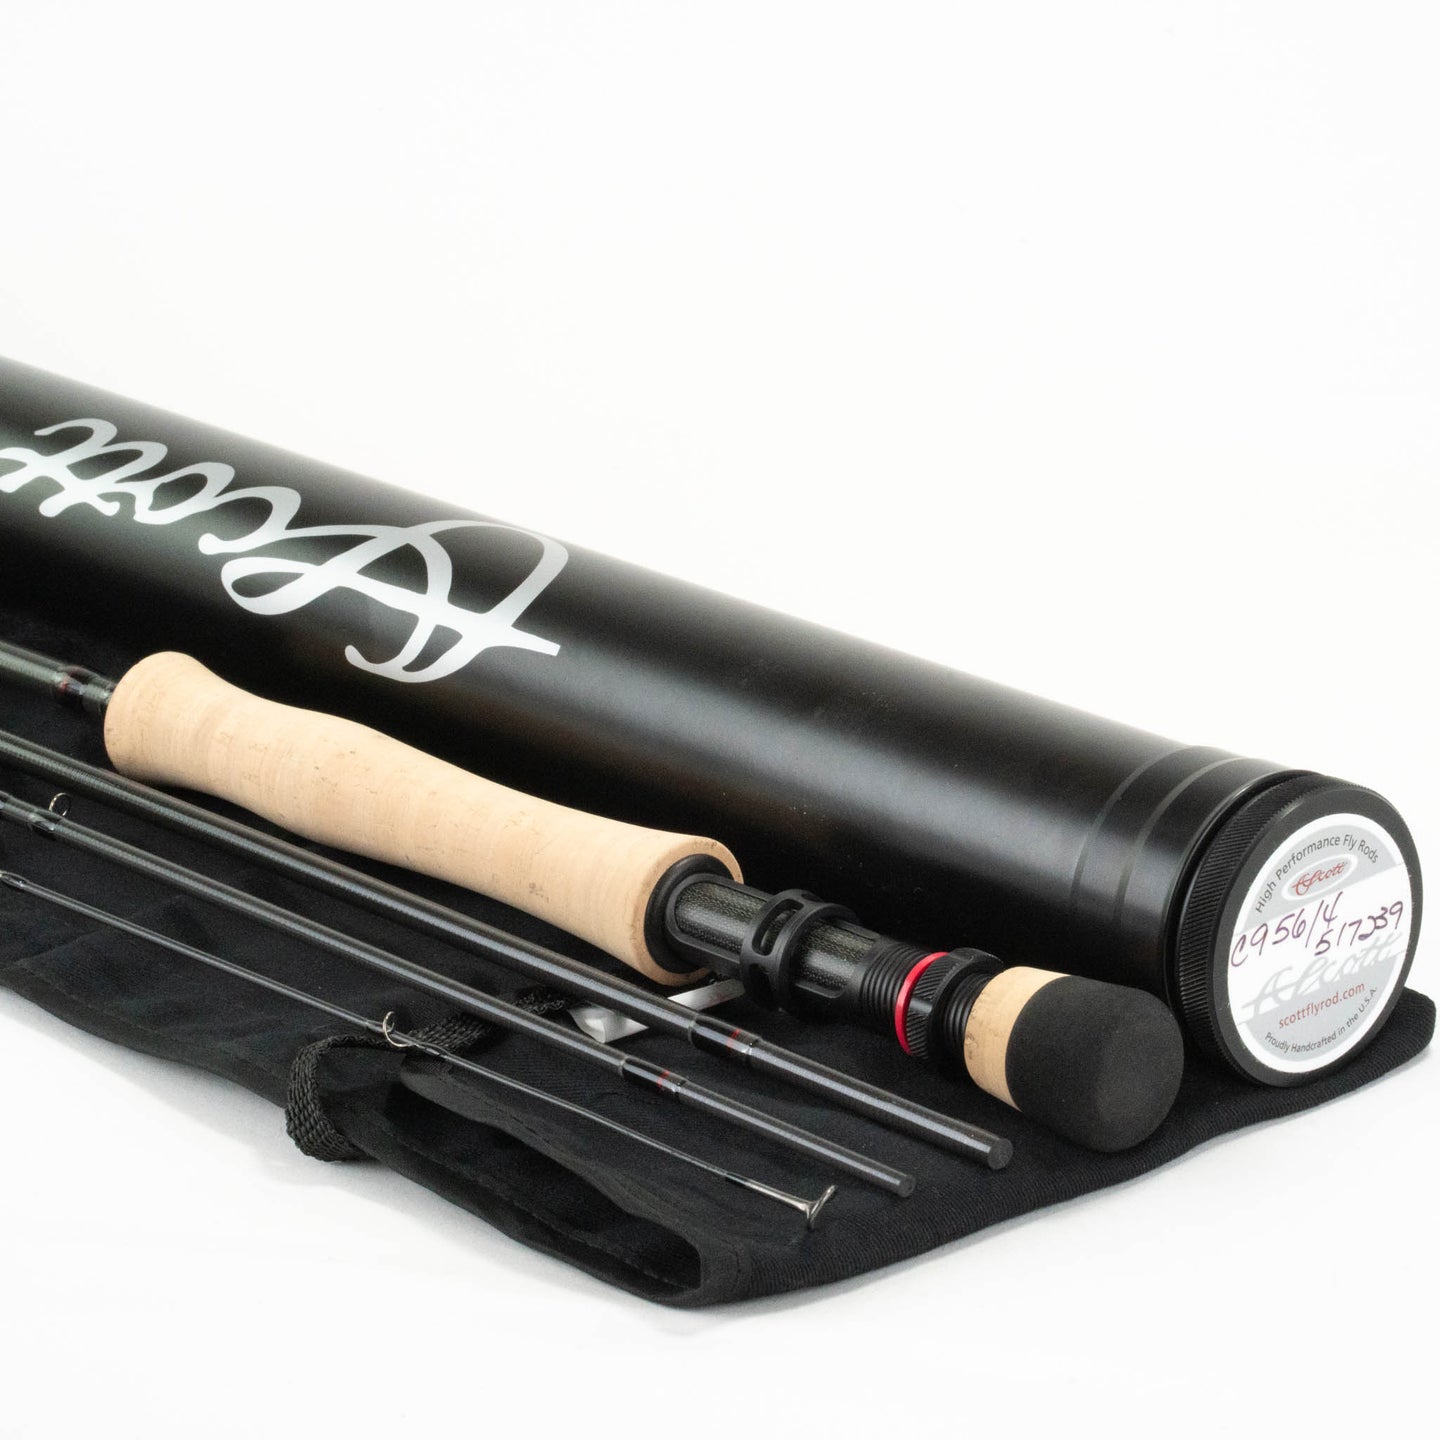 Scott Centric 696-4 Fly Rod - 6wt 9ft 6in 4pc